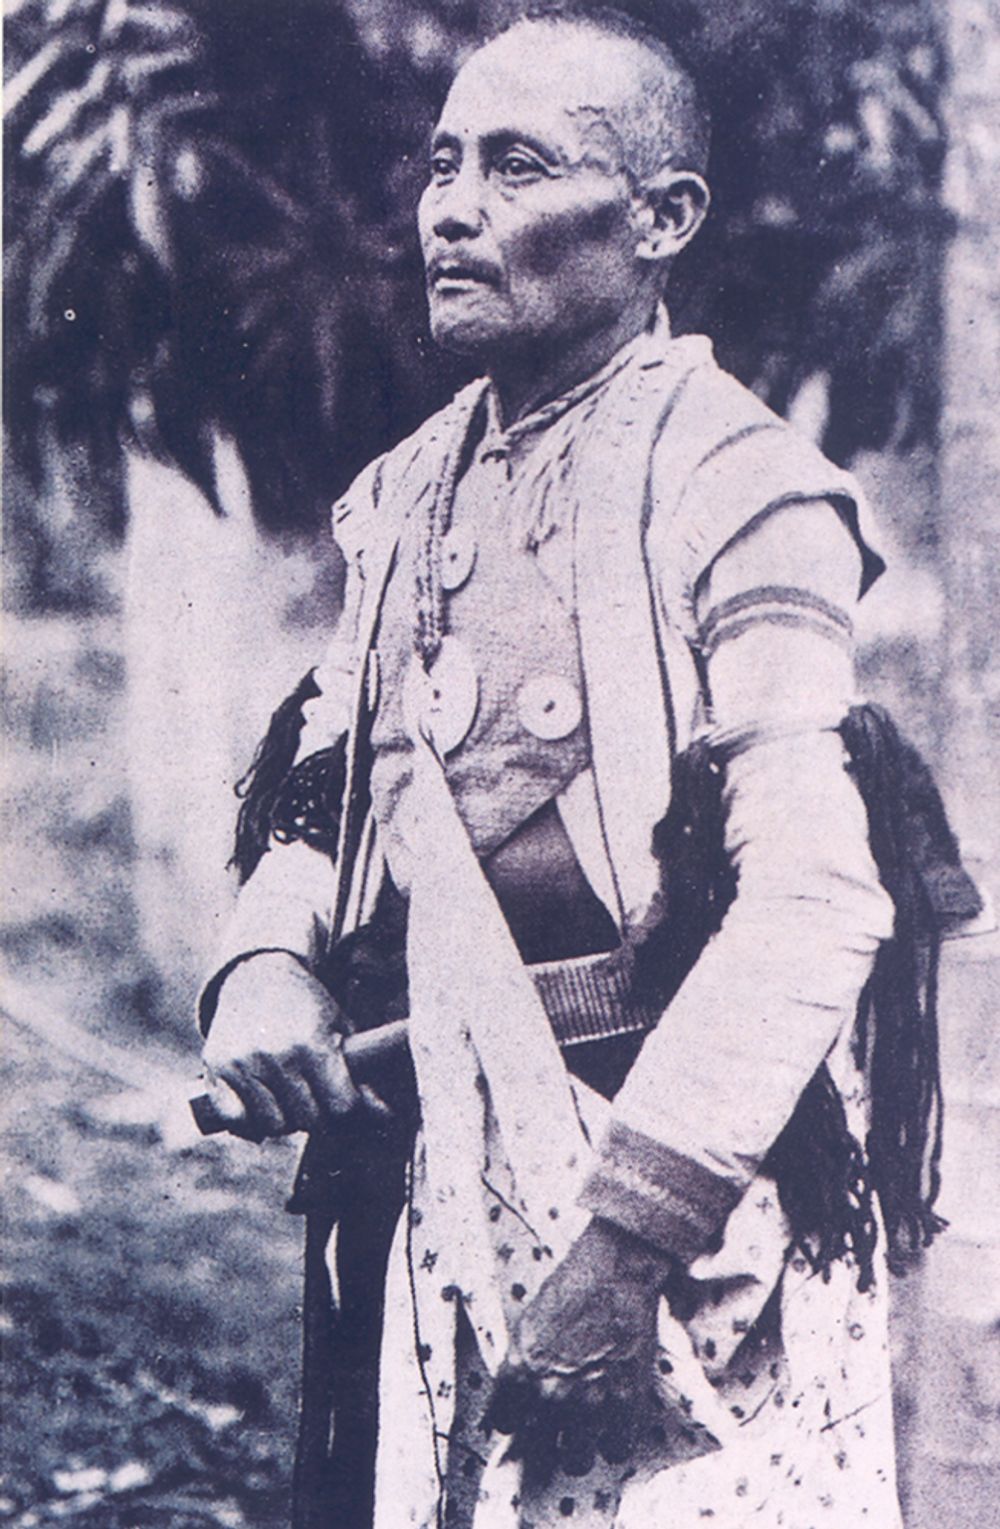 Chieftain of the Taroko people in the Atayal ethnic group